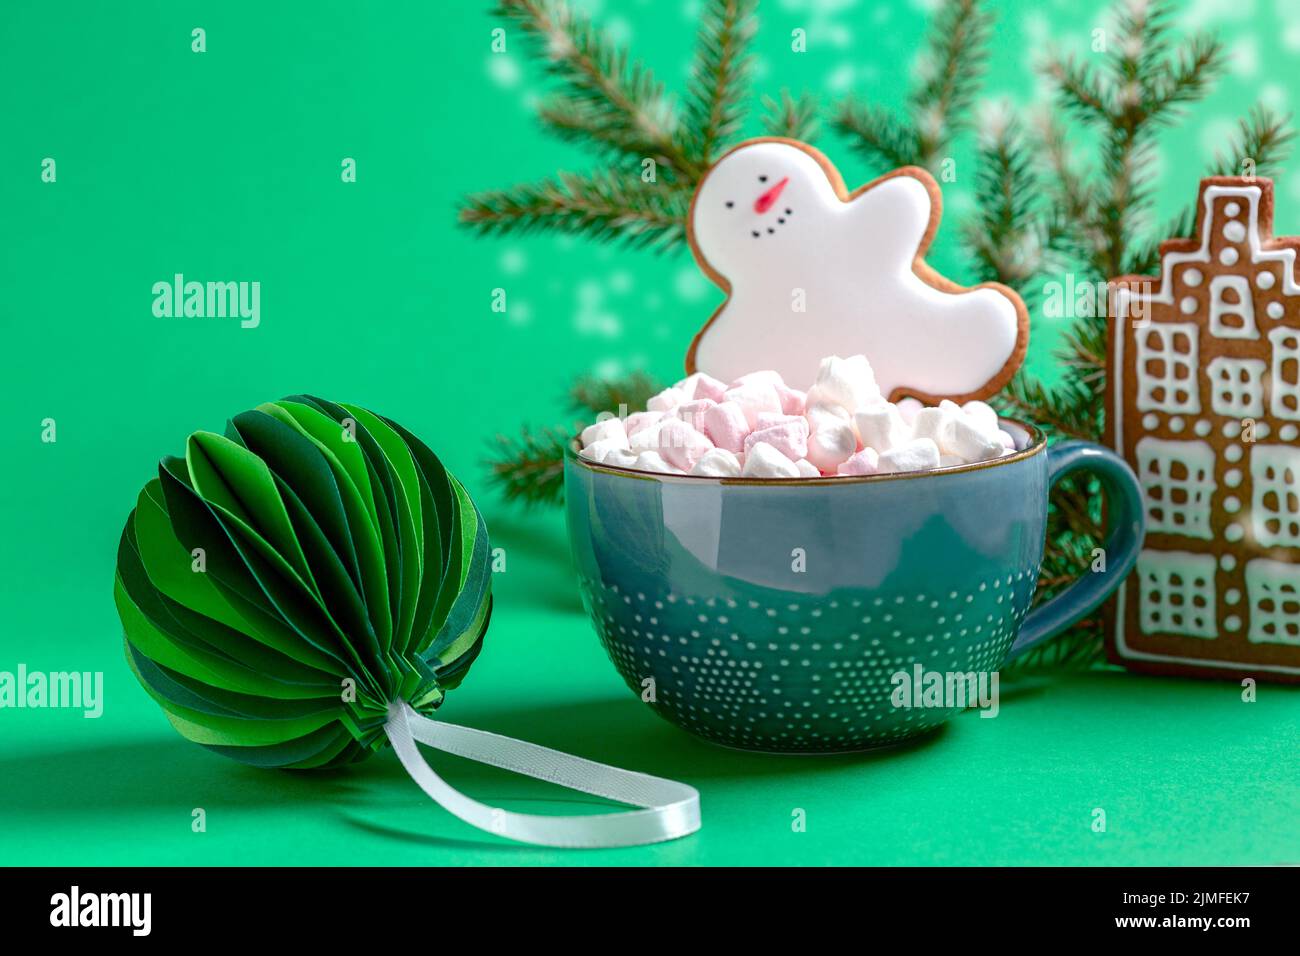 Traditional hot chocolate with marshmallows and gingerbread man. Stock Photo